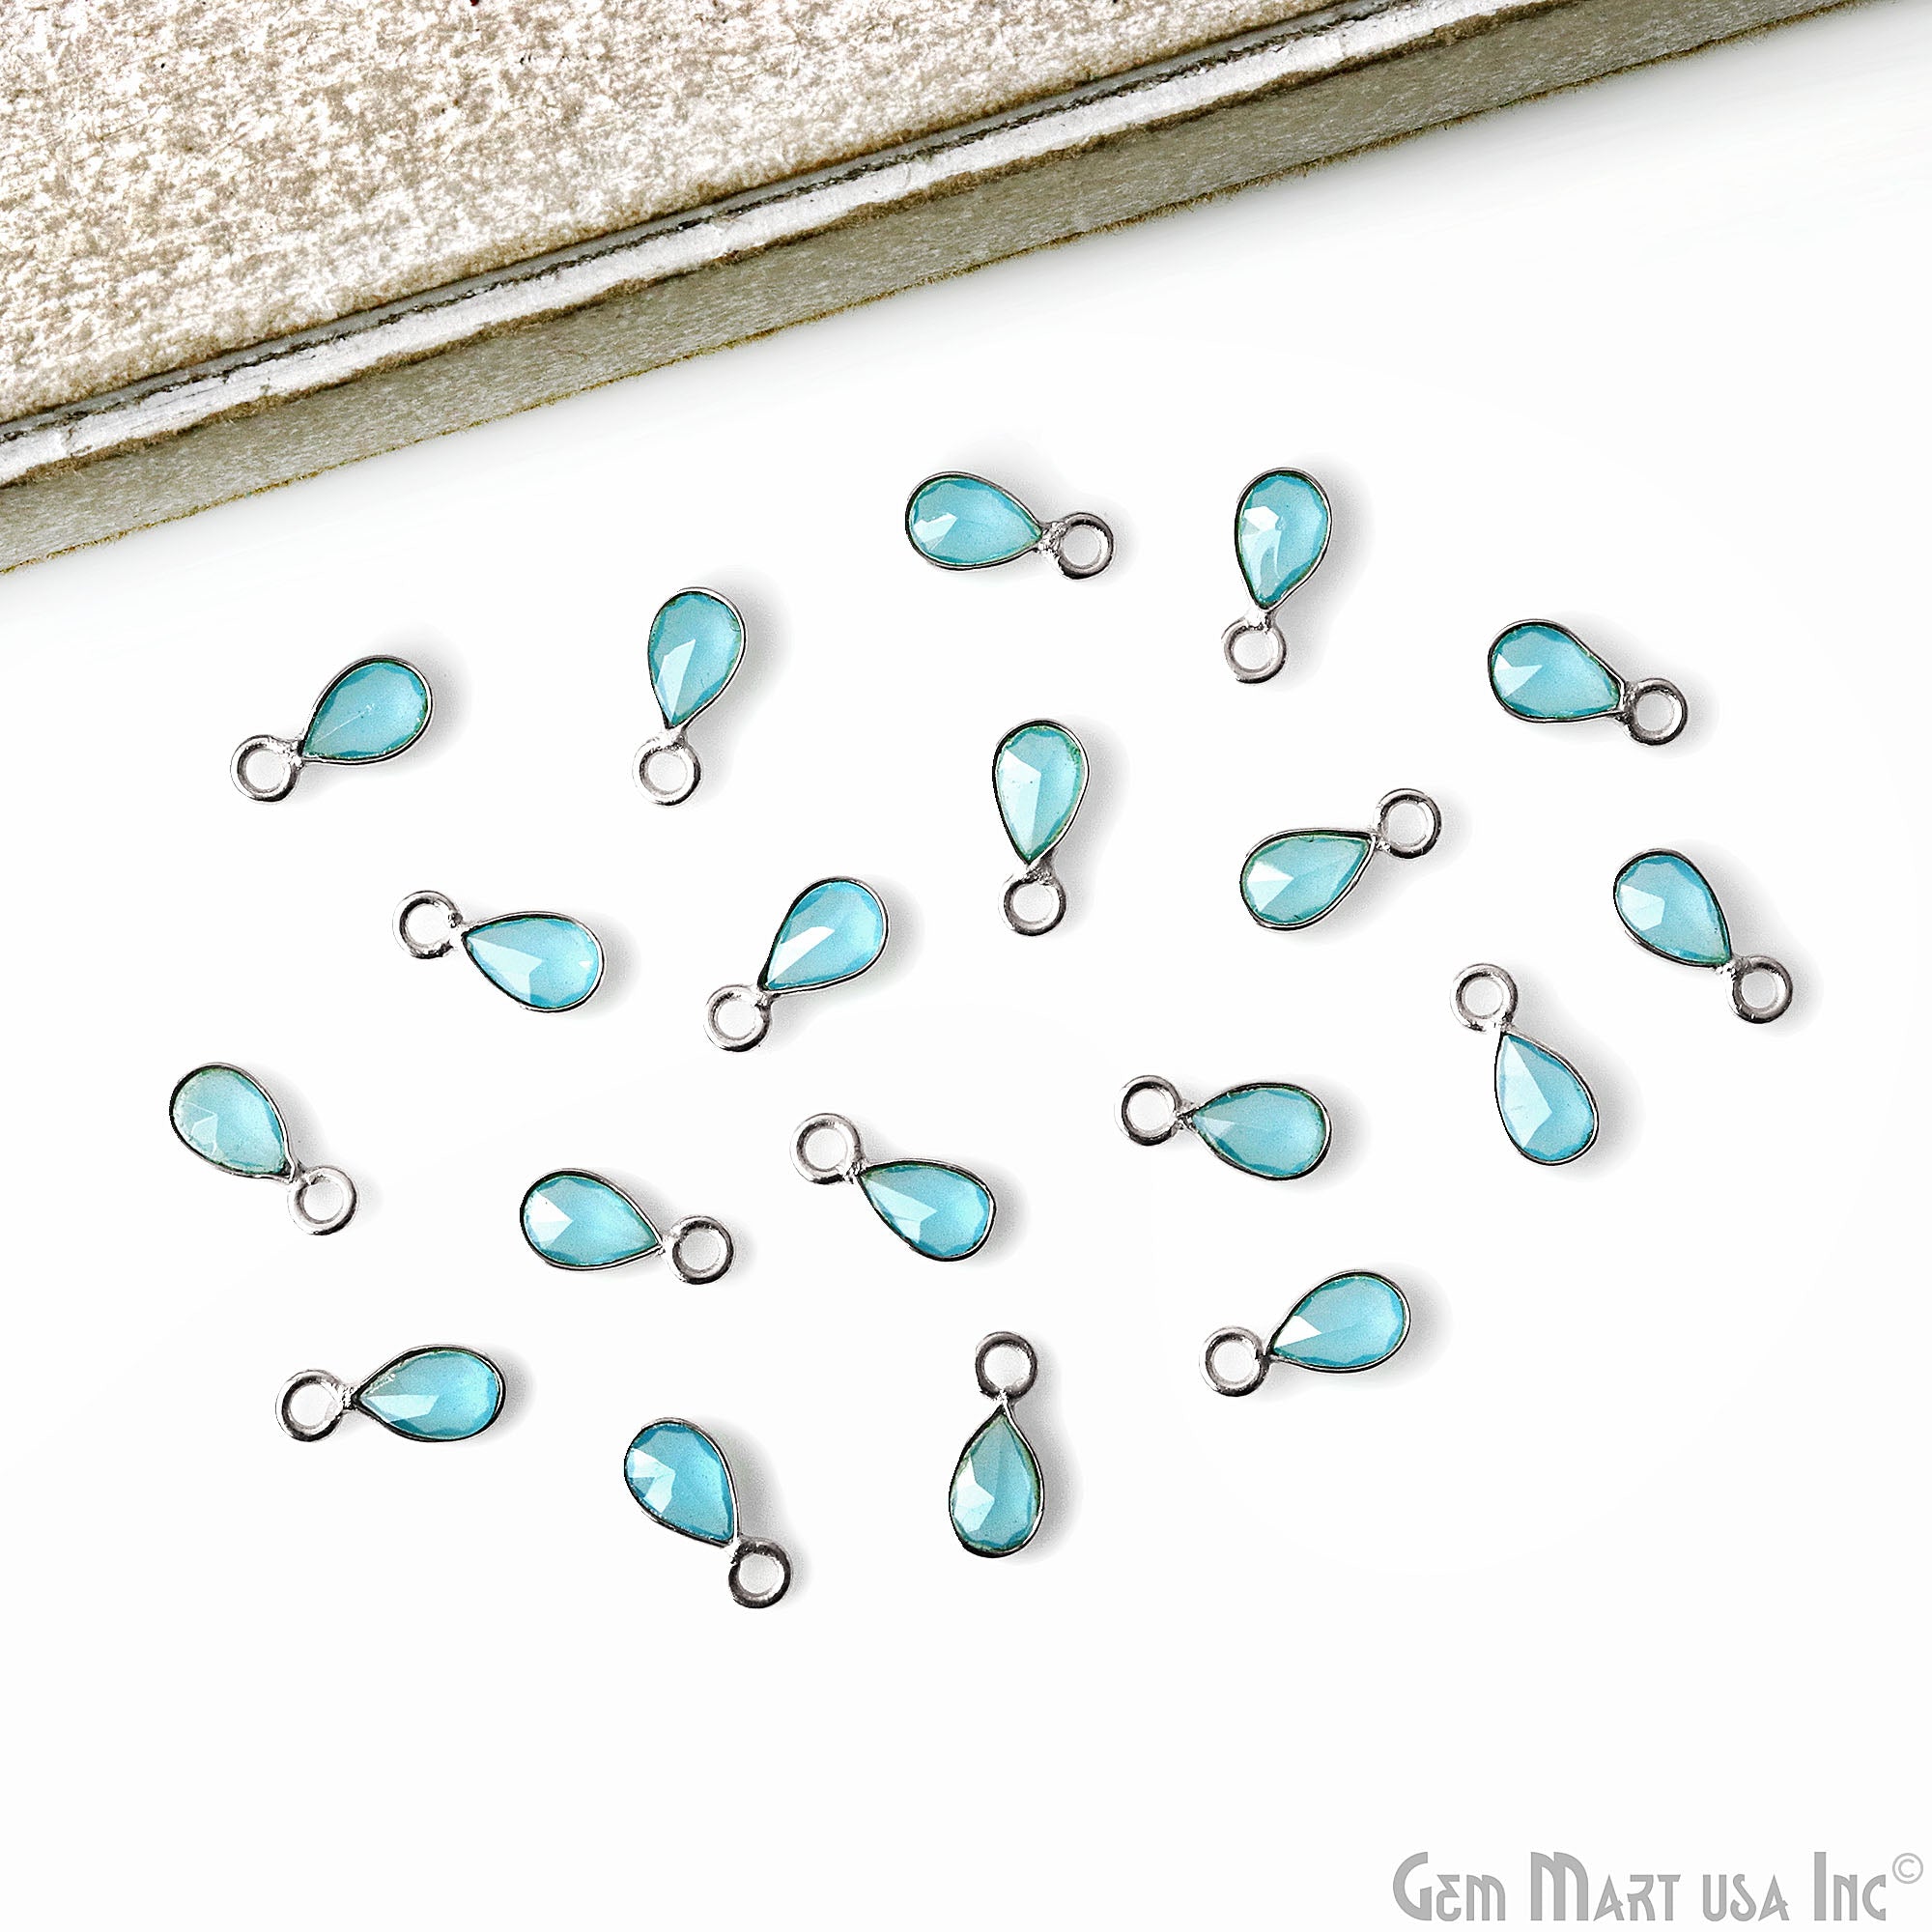 5pc Lot Sky Blue Chalcedony Pears 4x3mm Silver Plated Single Bail Brilliant Cut Gemstone Connector